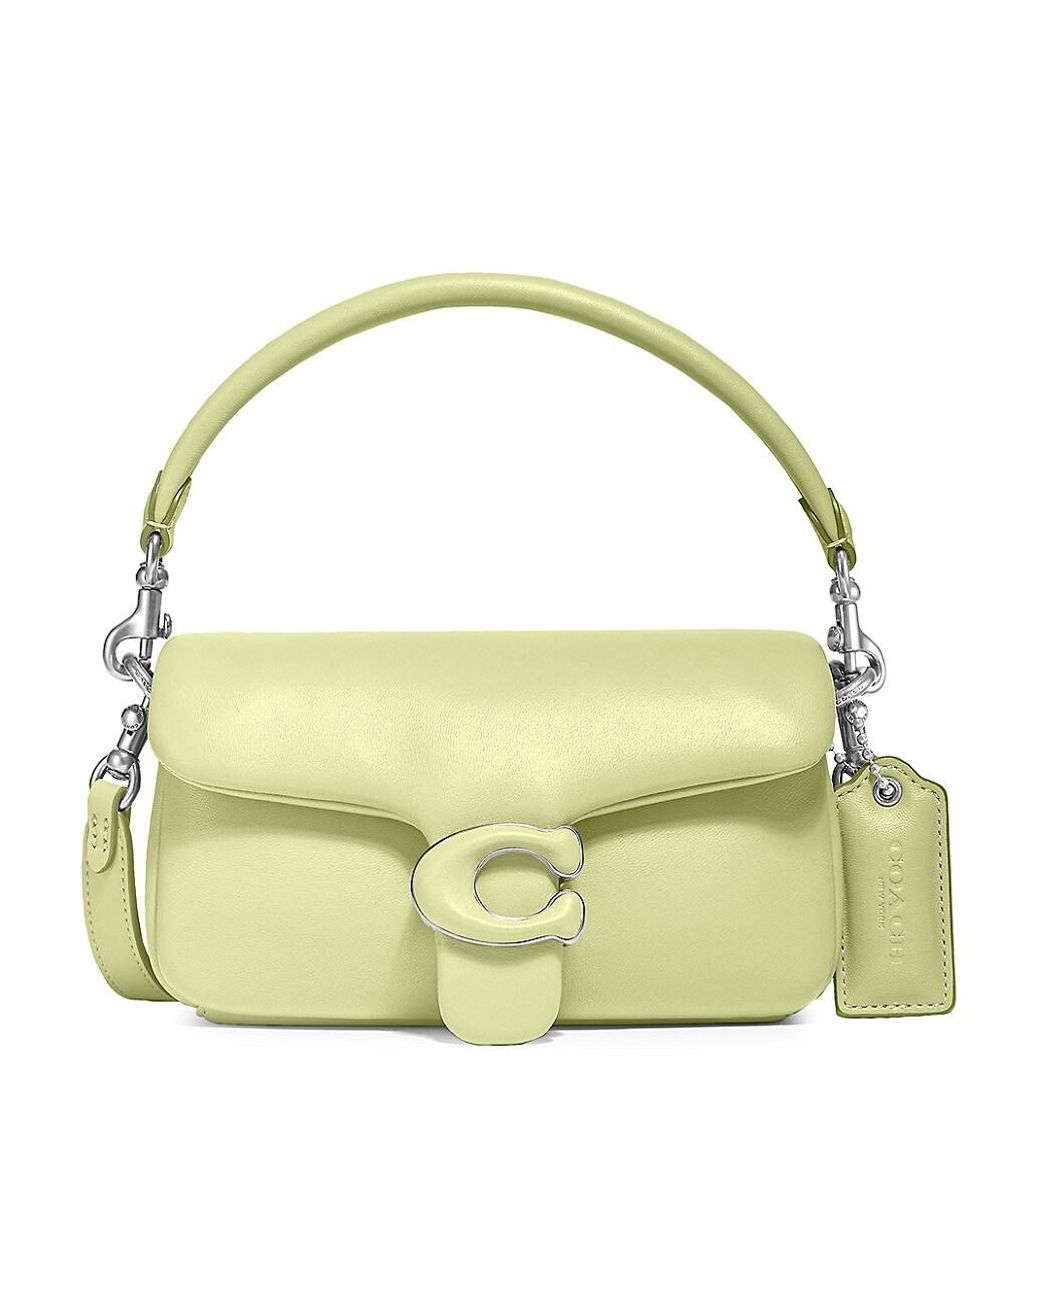 Coach Pillow Tabby 18 Leather Cross-body Bag - Ivory